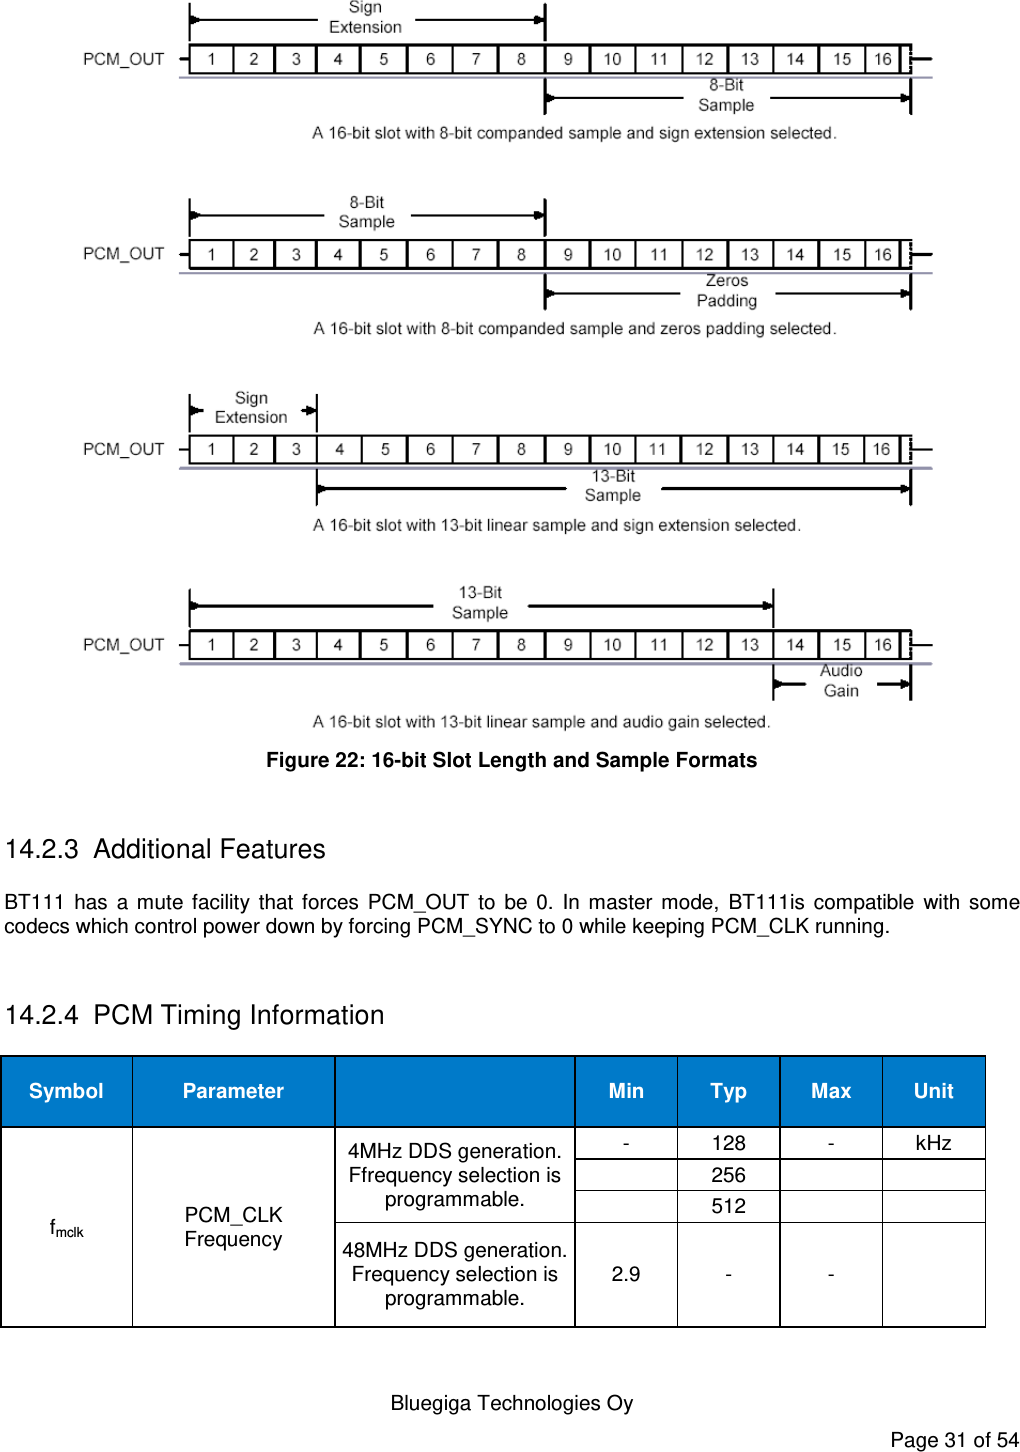    Bluegiga Technologies Oy Page 31 of 54  Figure 22: 16-bit Slot Length and Sample Formats  14.2.3  Additional Features BT111  has  a  mute  facility  that  forces  PCM_OUT  to  be  0.  In  master  mode,  BT111is  compatible  with  some codecs which control power down by forcing PCM_SYNC to 0 while keeping PCM_CLK running.  14.2.4  PCM Timing Information Symbol Parameter  Min Typ Max Unit fmclk PCM_CLK Frequency 4MHz DDS generation. Ffrequency selection is programmable. - 128 - kHz  256    512   48MHz DDS generation. Frequency selection is programmable. 2.9 - -  